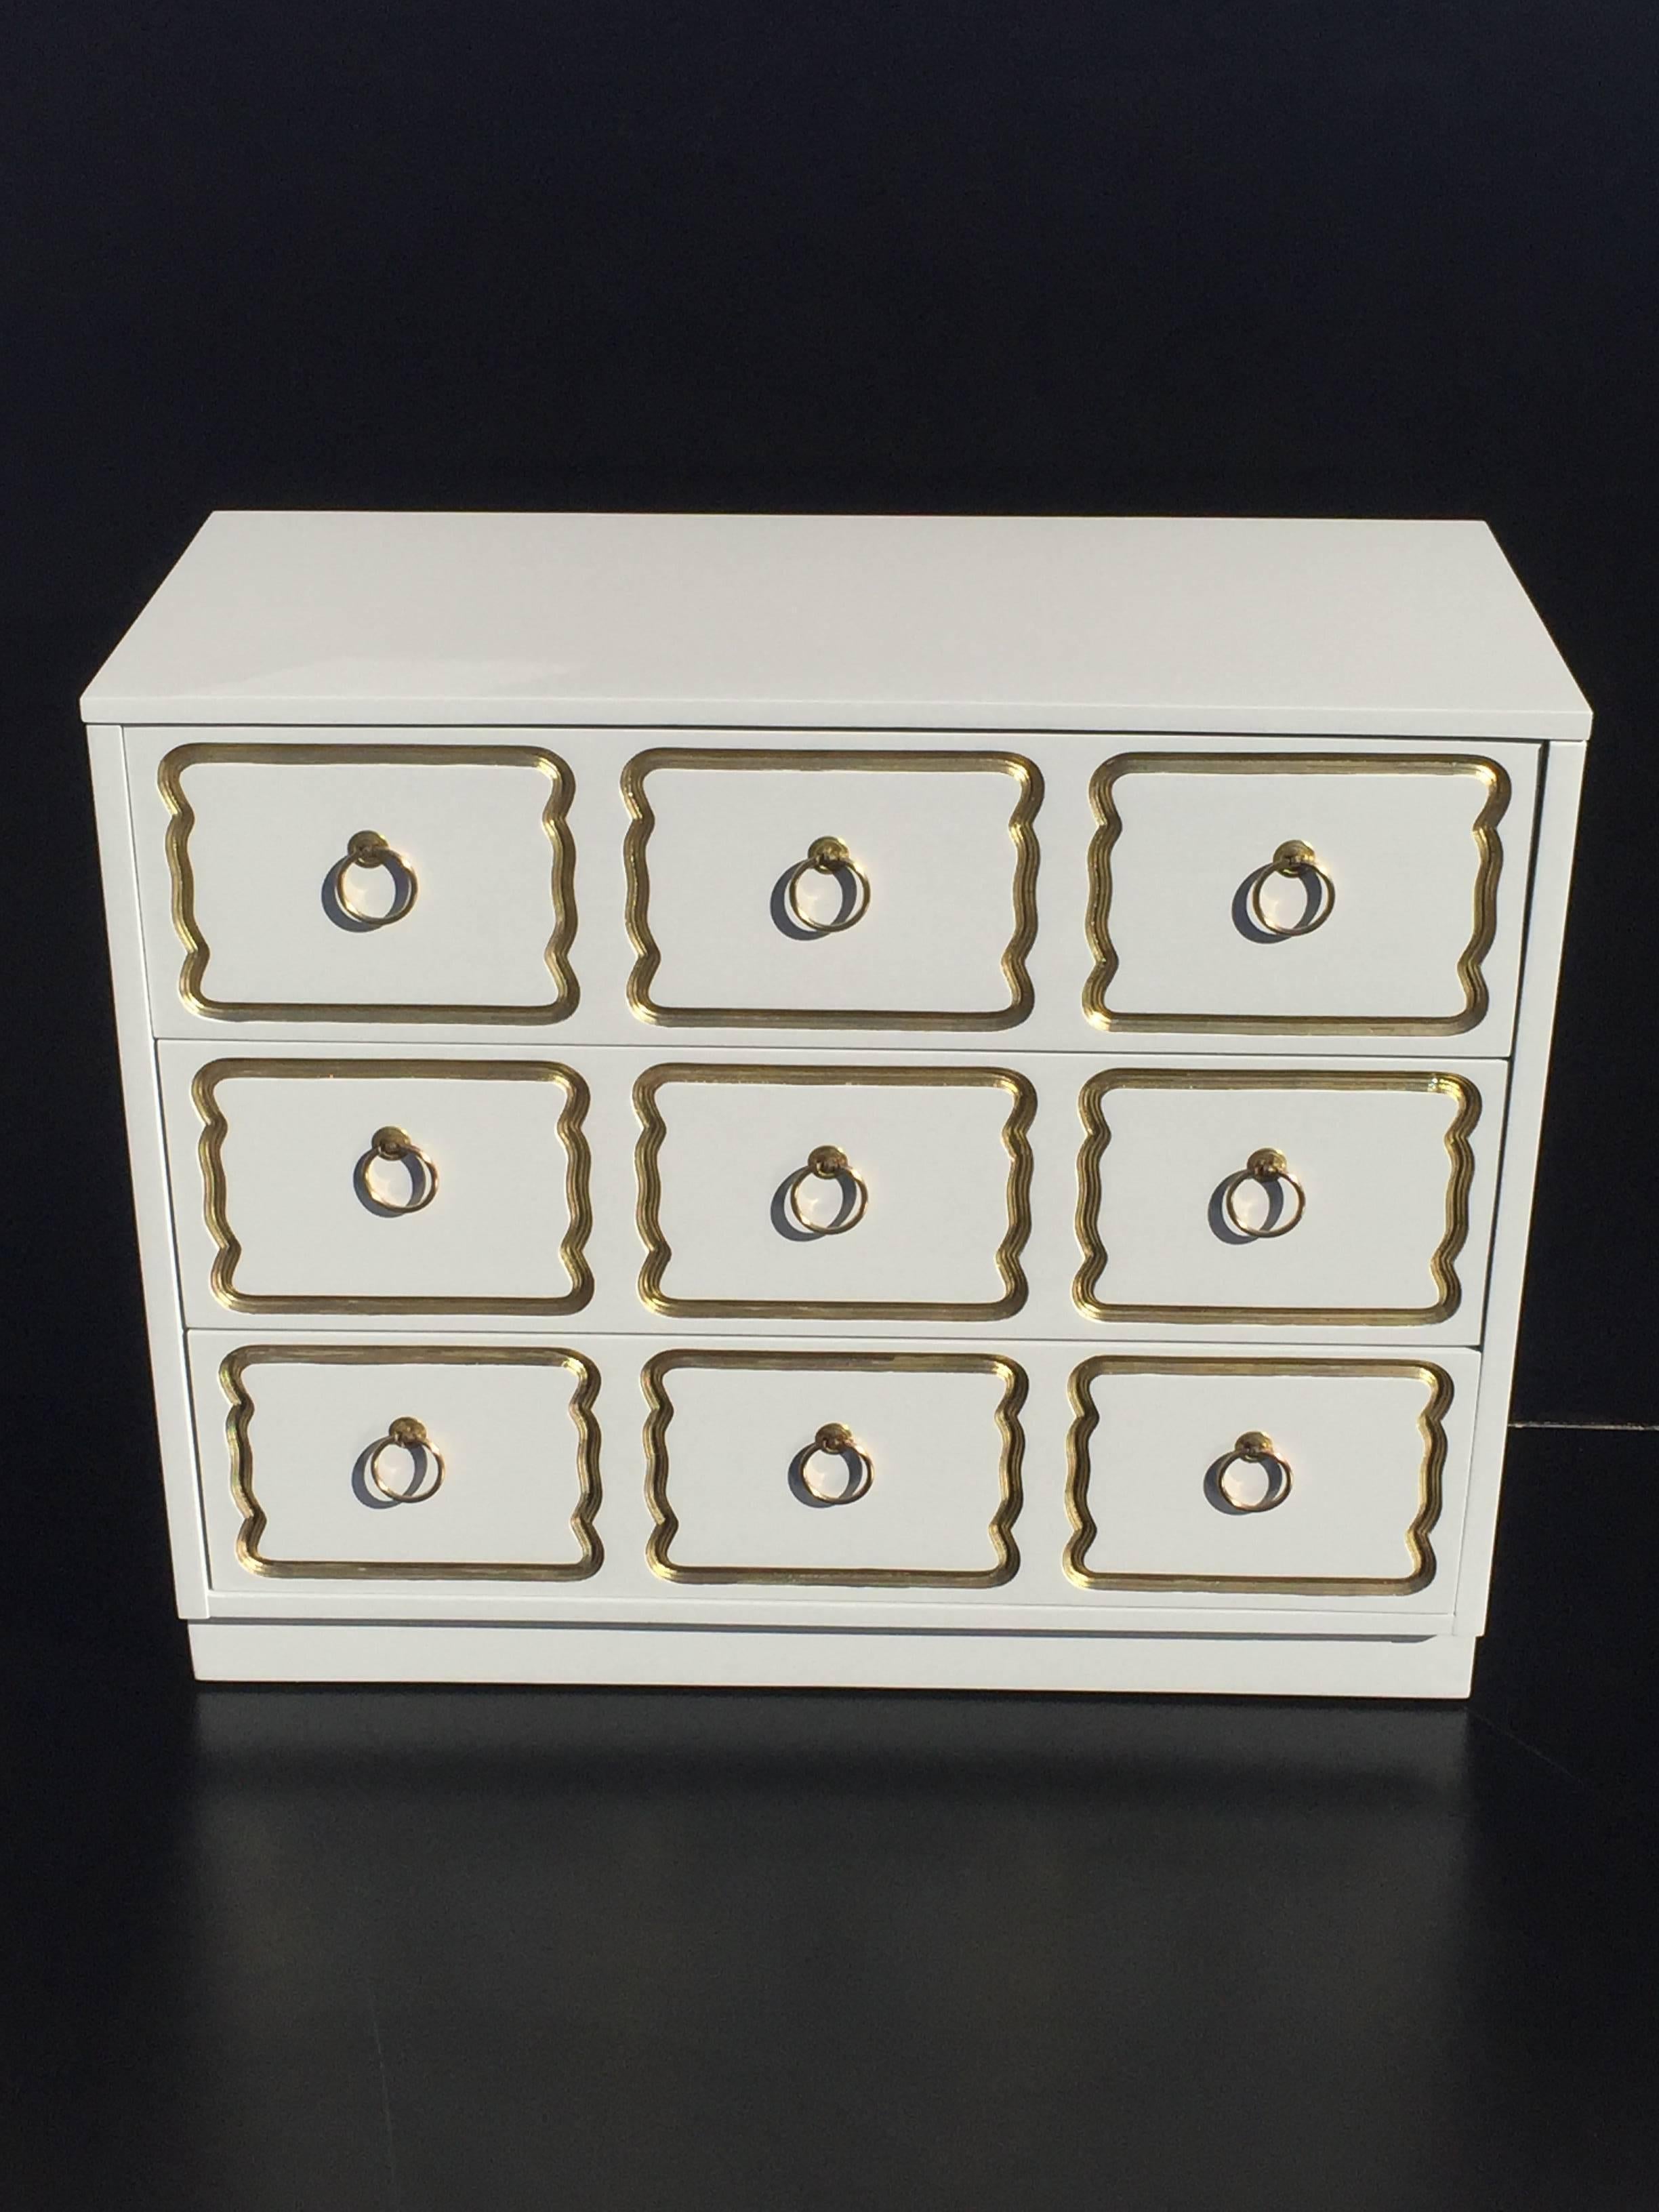 Chest of drawers in cream lacquer and gold in the style of Dorothy Draper.